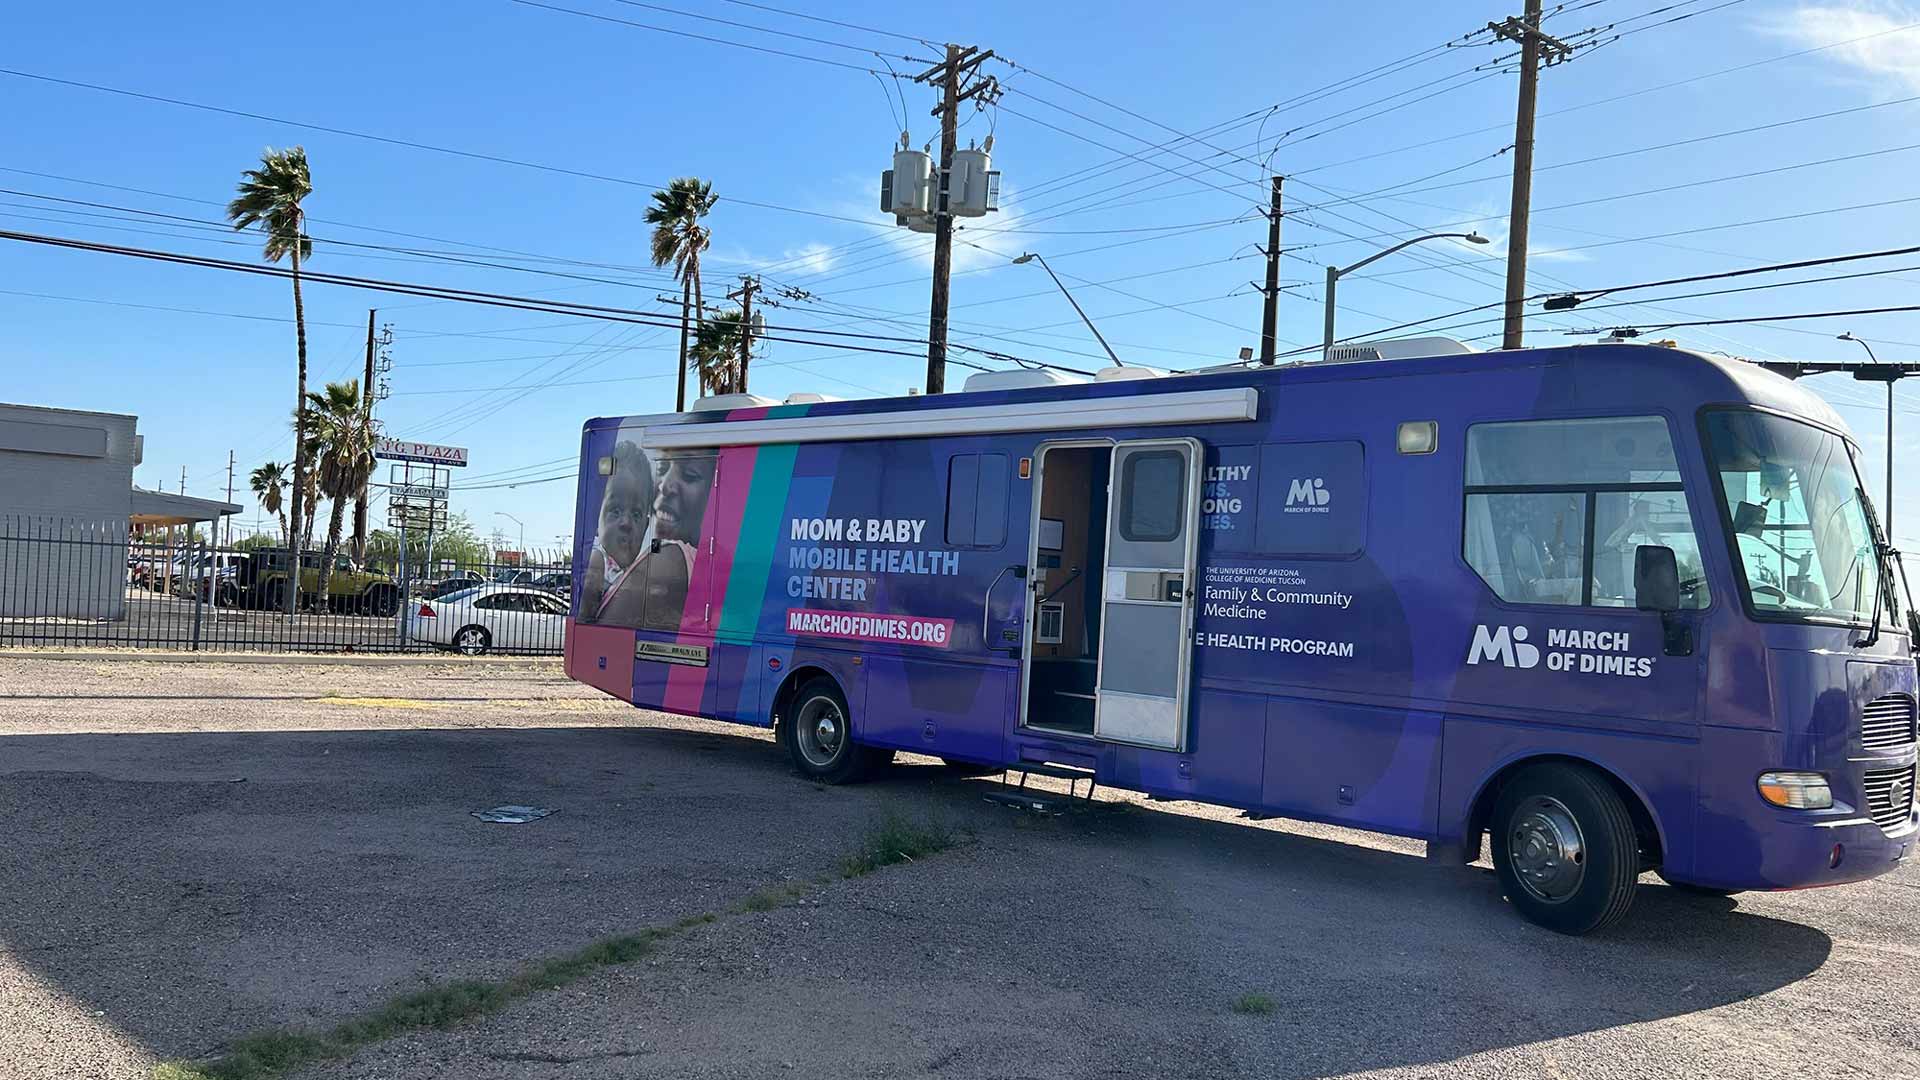 The bright purple, March of Dimes Mom and Baby Unit, provides health care to the uninsured, underinsured, and people who are homeless in Tucson.